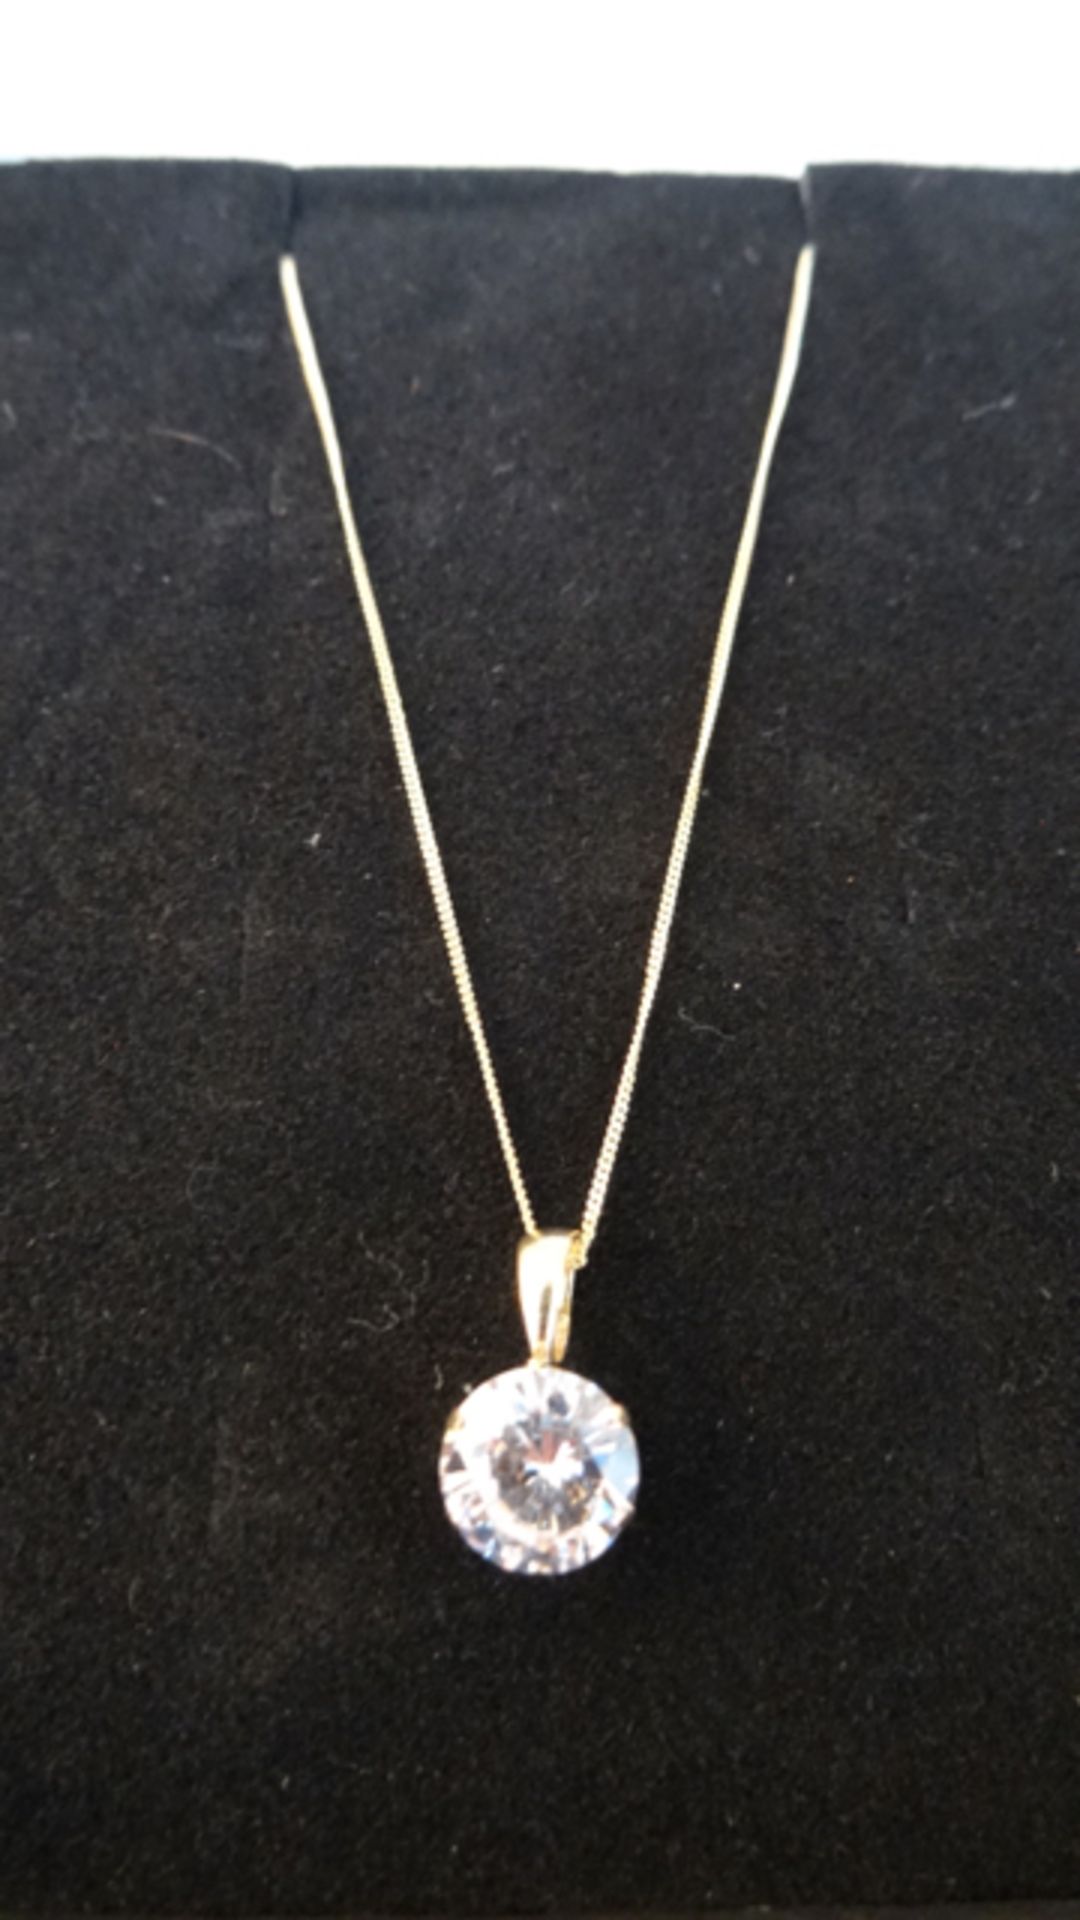 1 x 9 Carat Yellow Gold Chain with Cubic Zirconia Pendant. Retail value £79. - Image 2 of 3